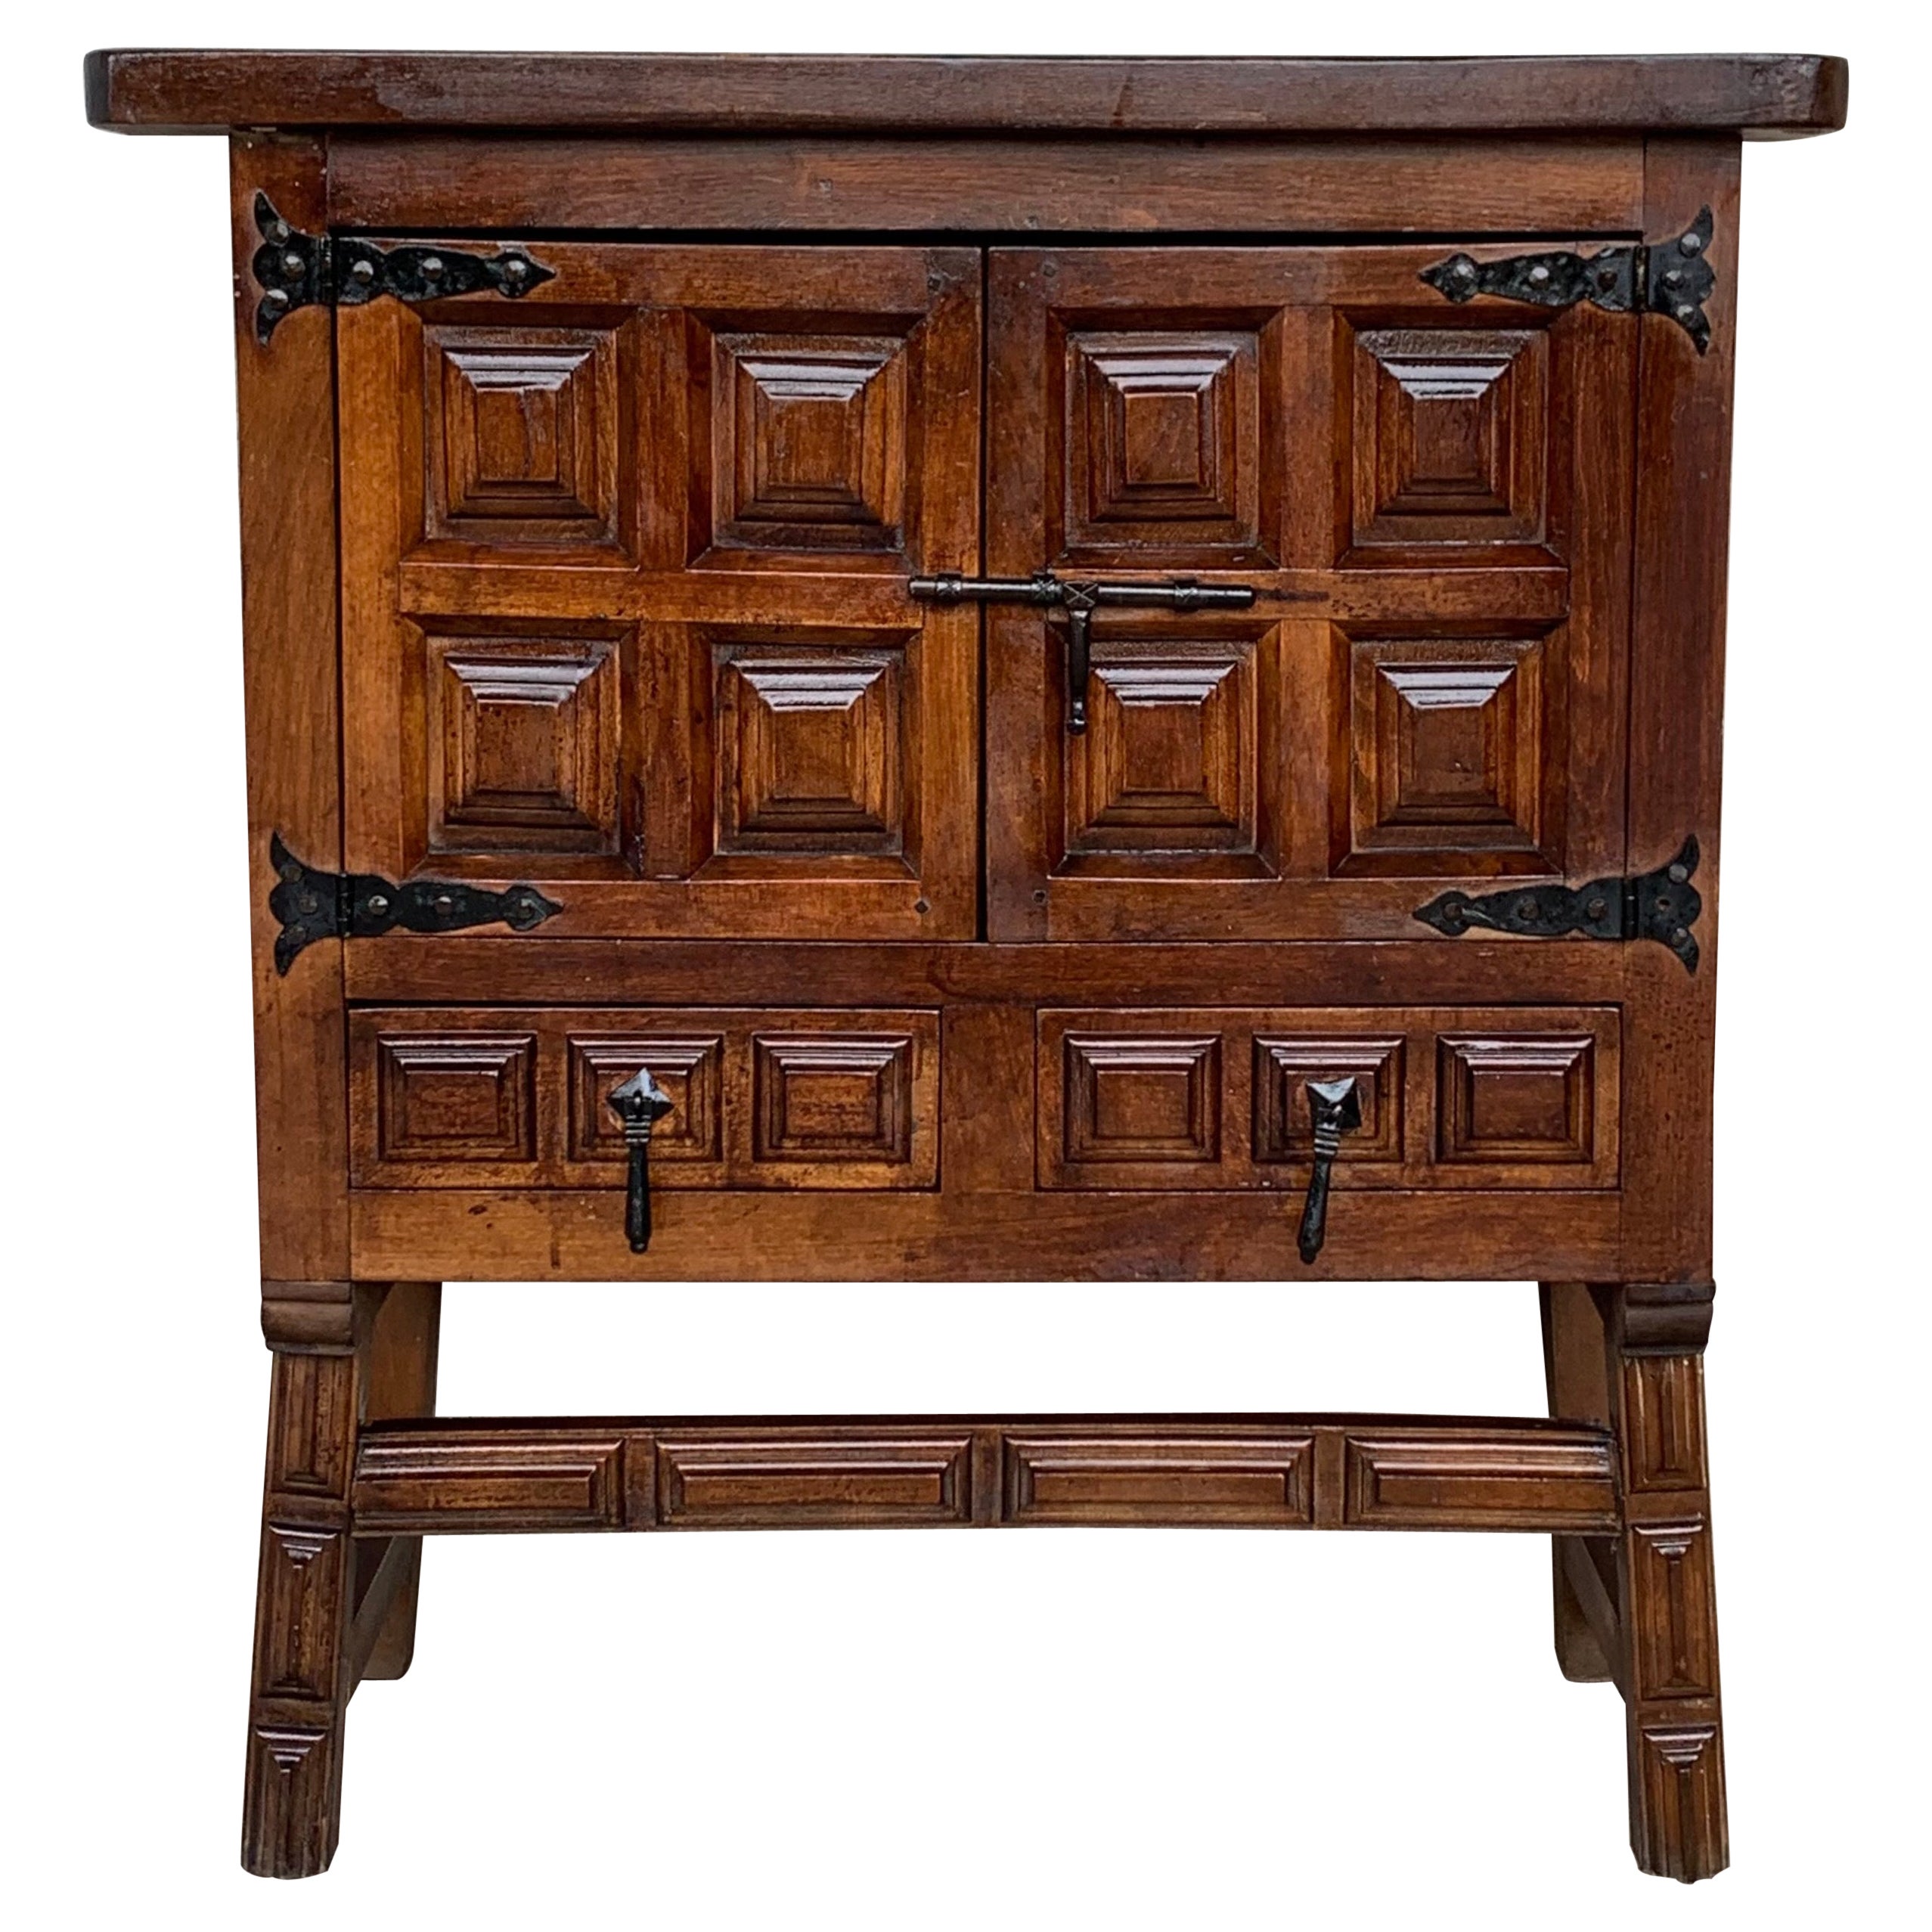 19th Catalan Spanish Baroque Carved Walnut Tuscan Two Drawers Chest of Drawers